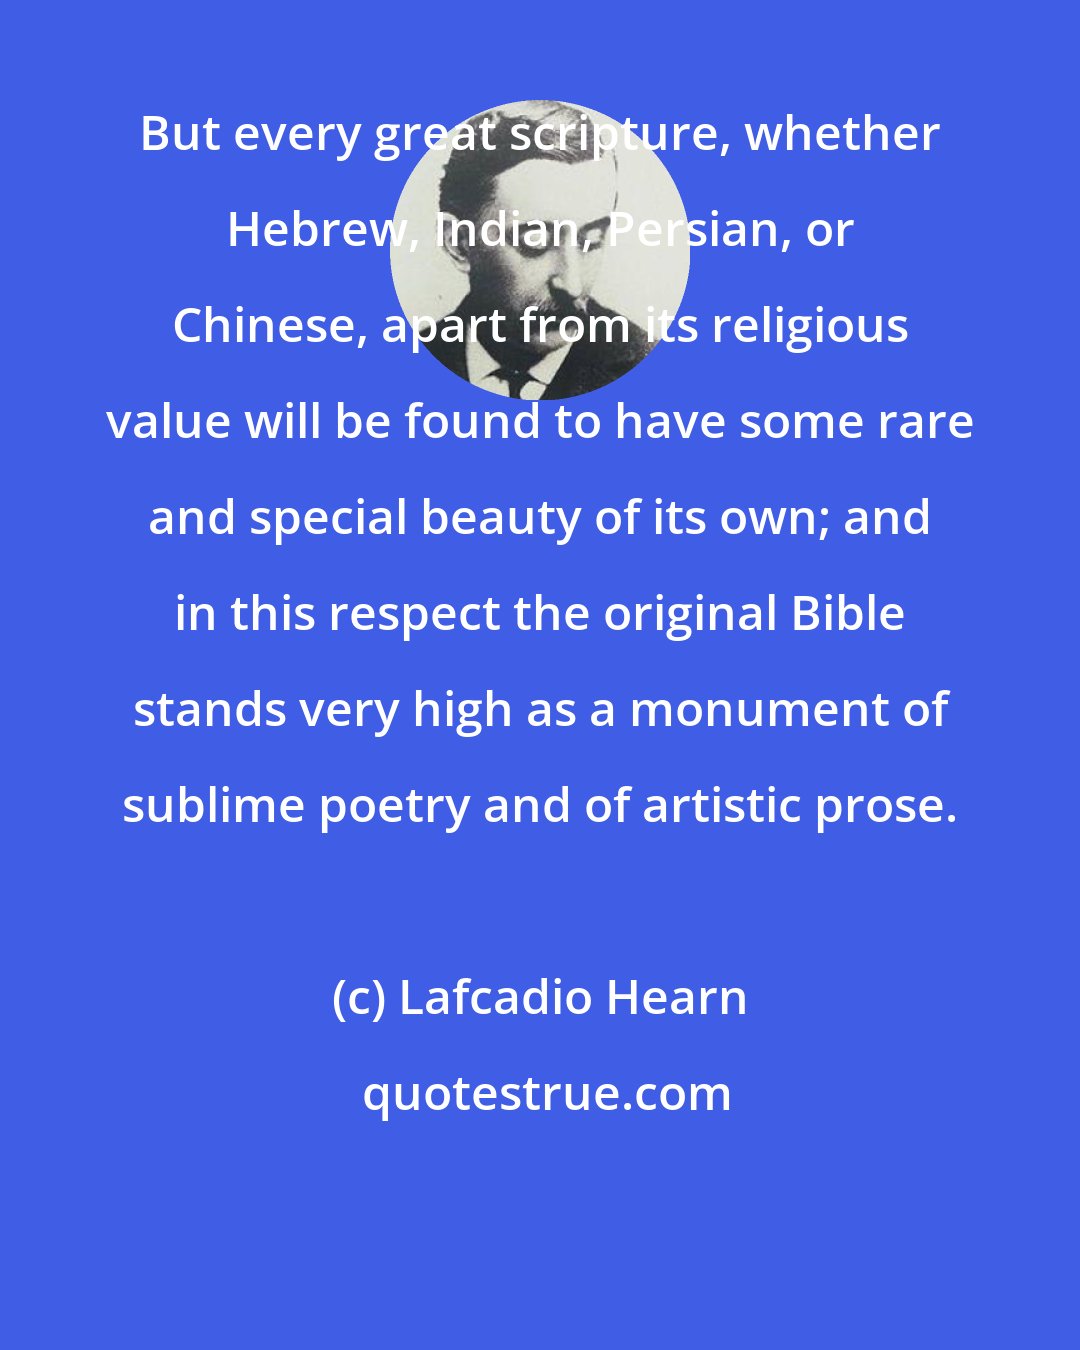 Lafcadio Hearn: But every great scripture, whether Hebrew, Indian, Persian, or Chinese, apart from its religious value will be found to have some rare and special beauty of its own; and in this respect the original Bible stands very high as a monument of sublime poetry and of artistic prose.